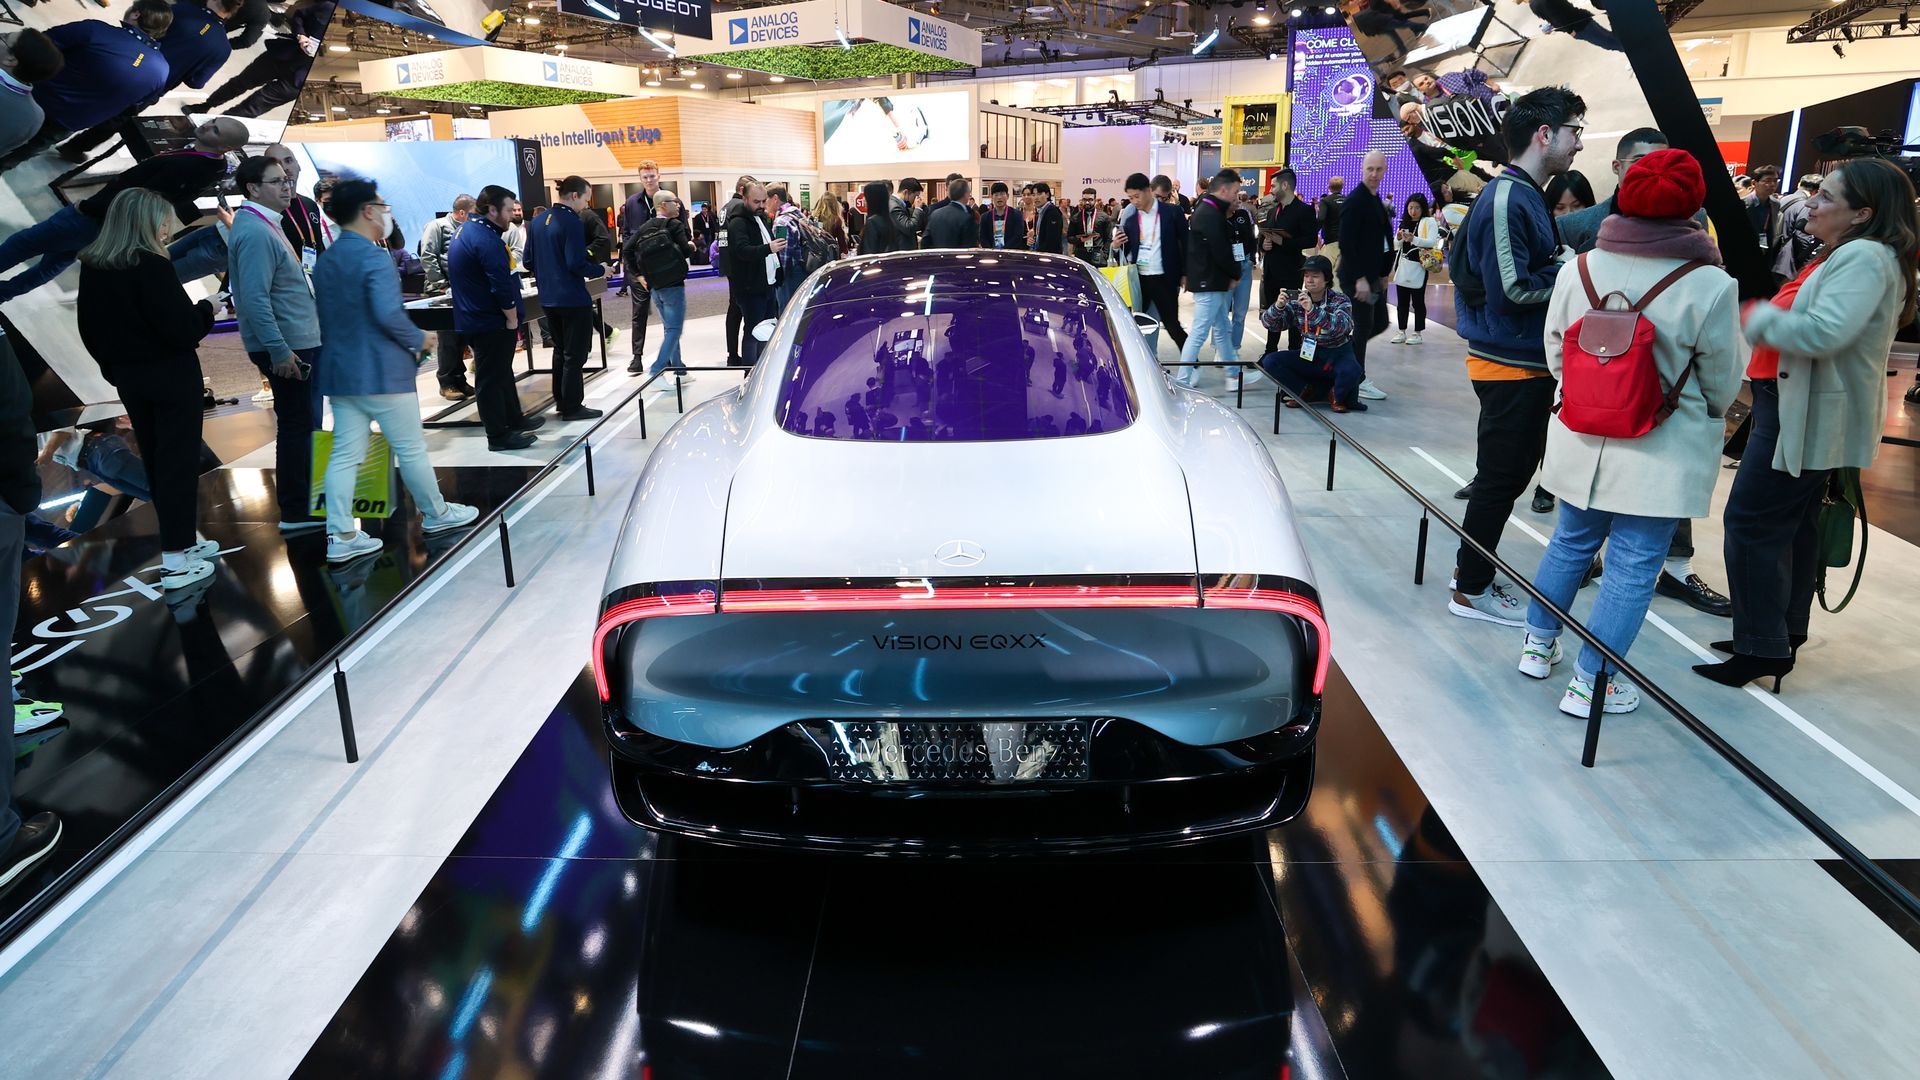 Mercedes VISION EQXX is displayed at CES.